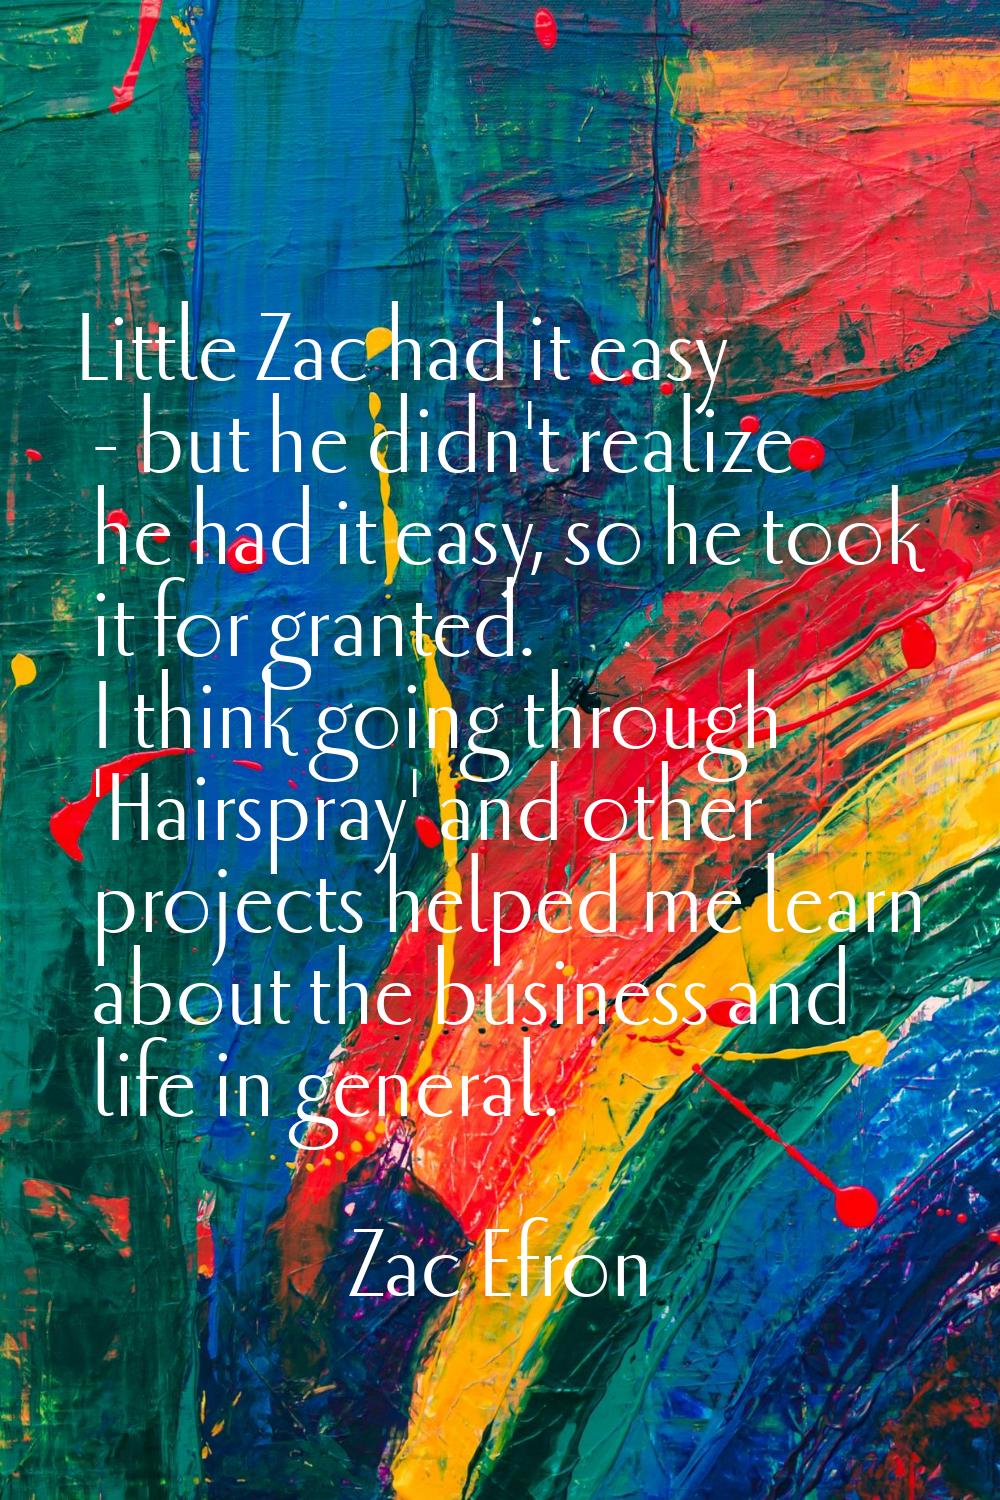 Little Zac had it easy - but he didn't realize he had it easy, so he took it for granted. I think g